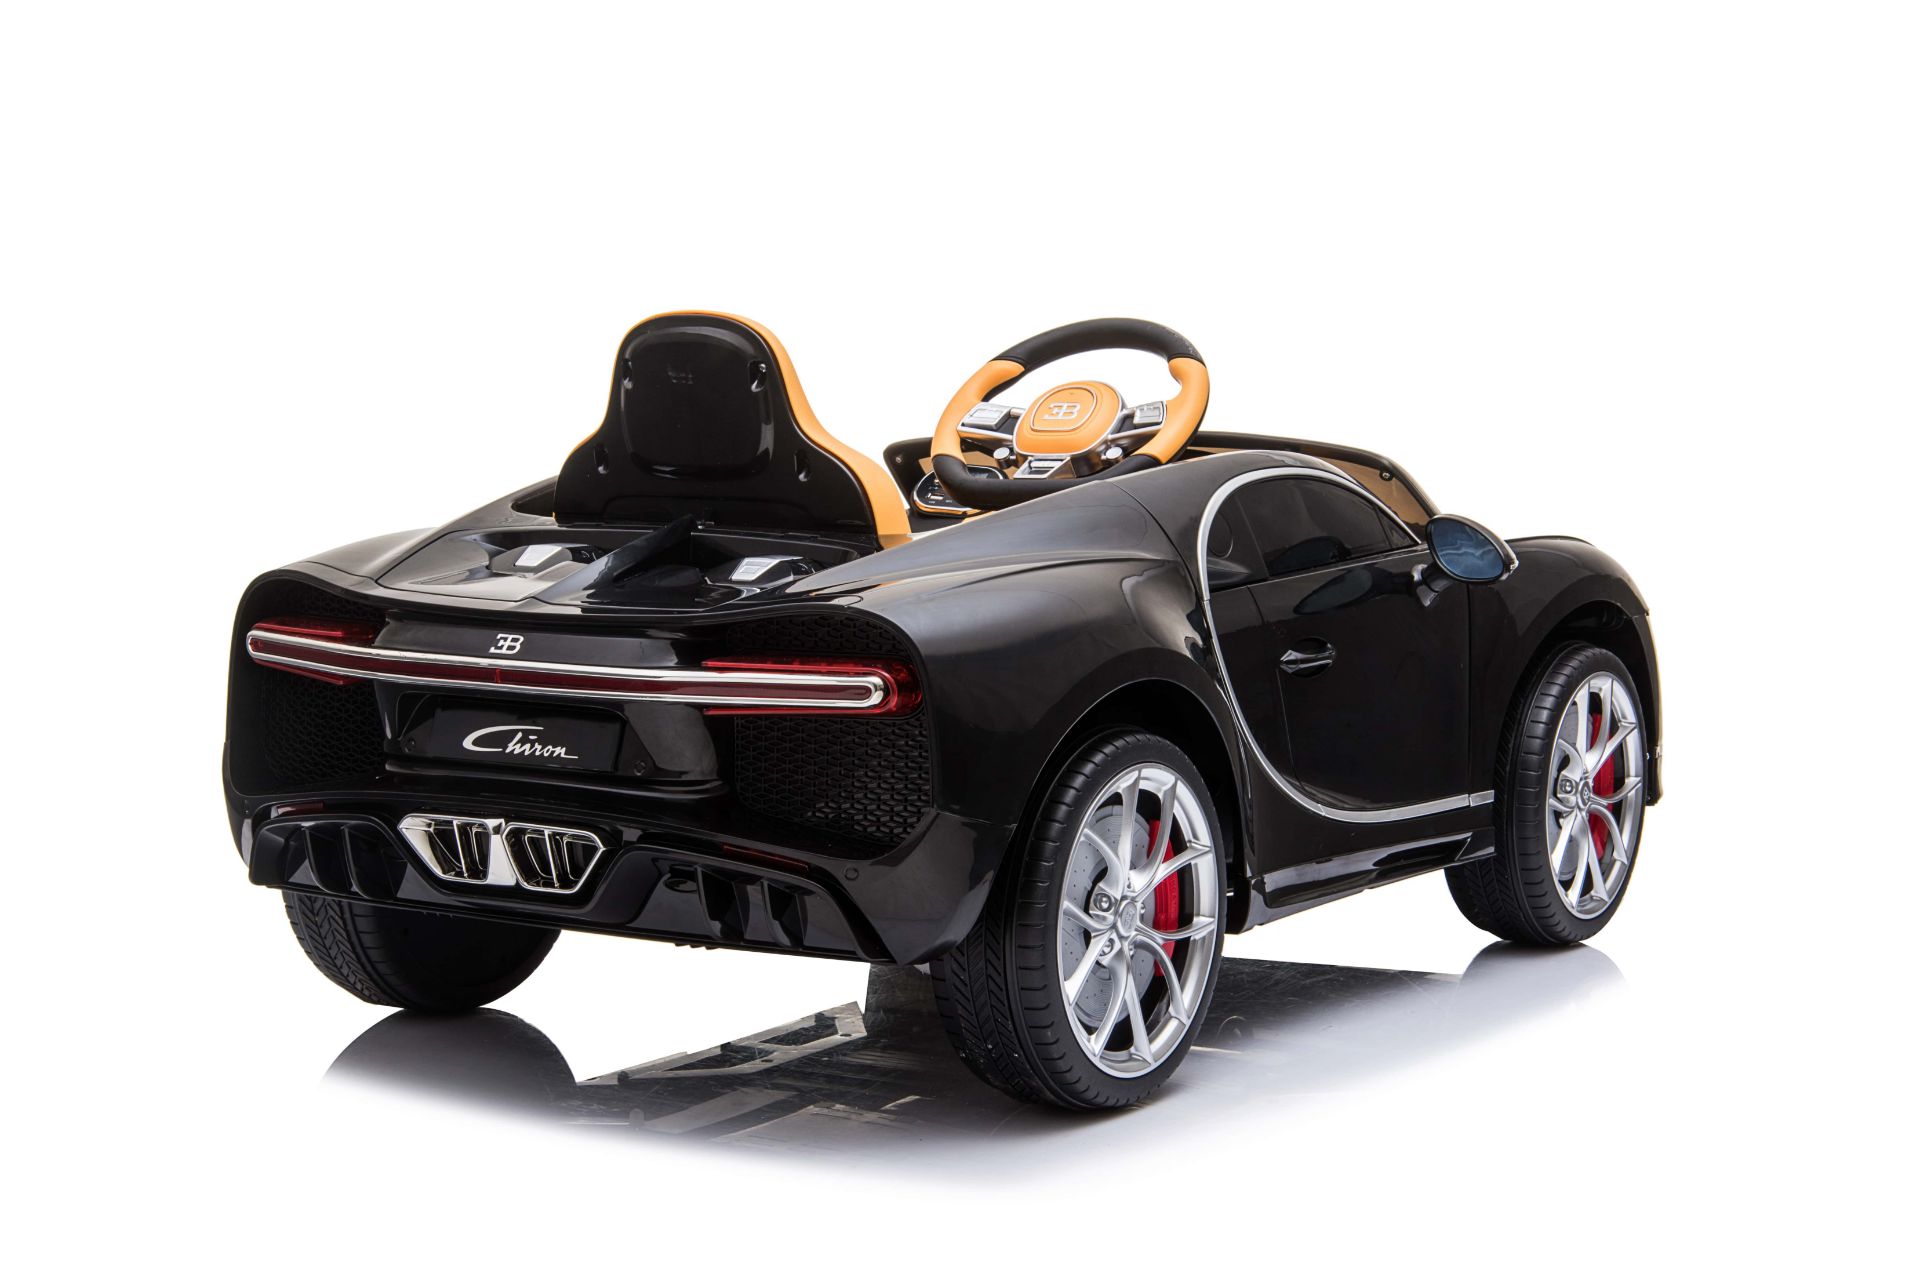 RIDE ON FULLY LICENCED BUGATTI CHIRON 12V WITH PARENTAL REMOTE CONTROL - BLACK - Image 7 of 7